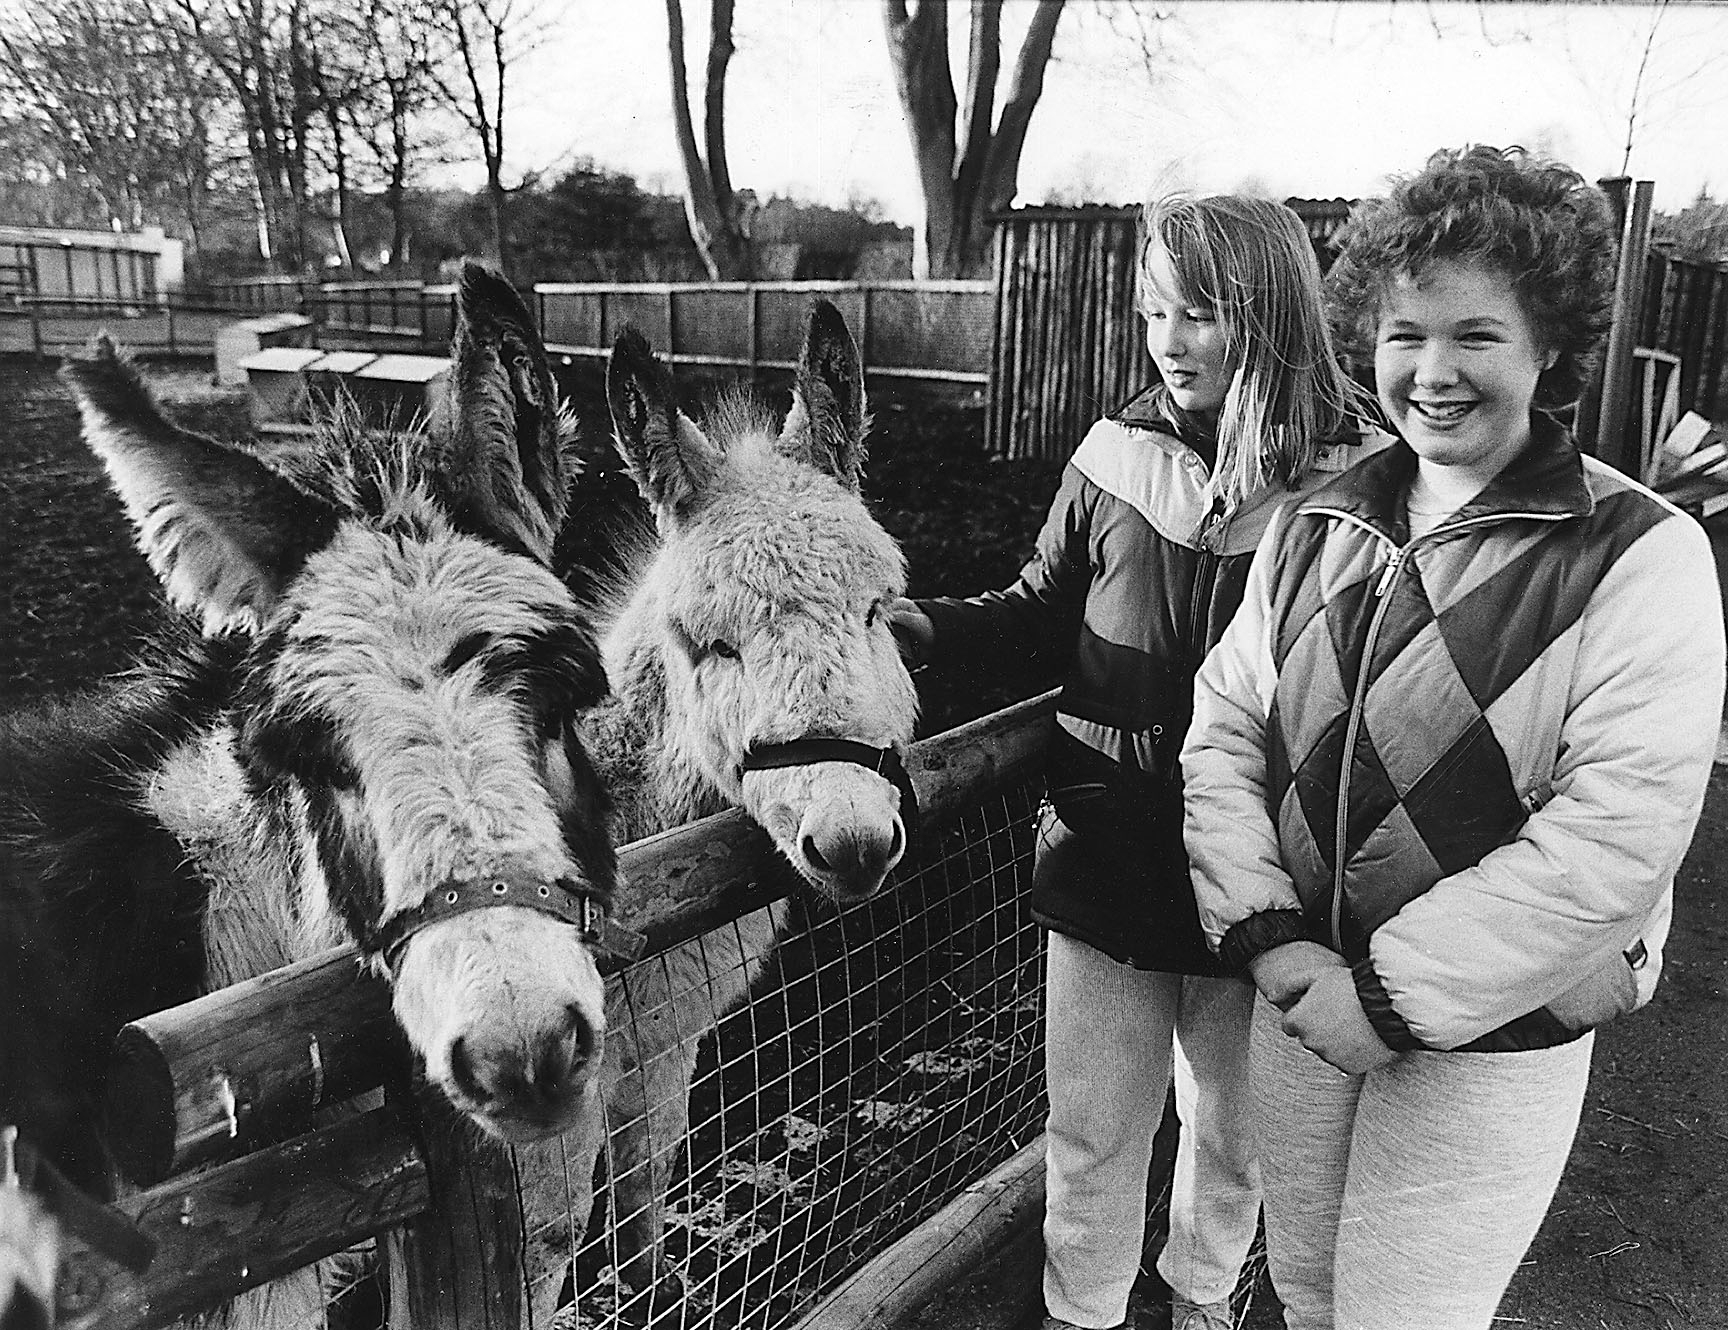 Stephanie Chesney and Nicola Connon with donkeys at the petting zoo. 